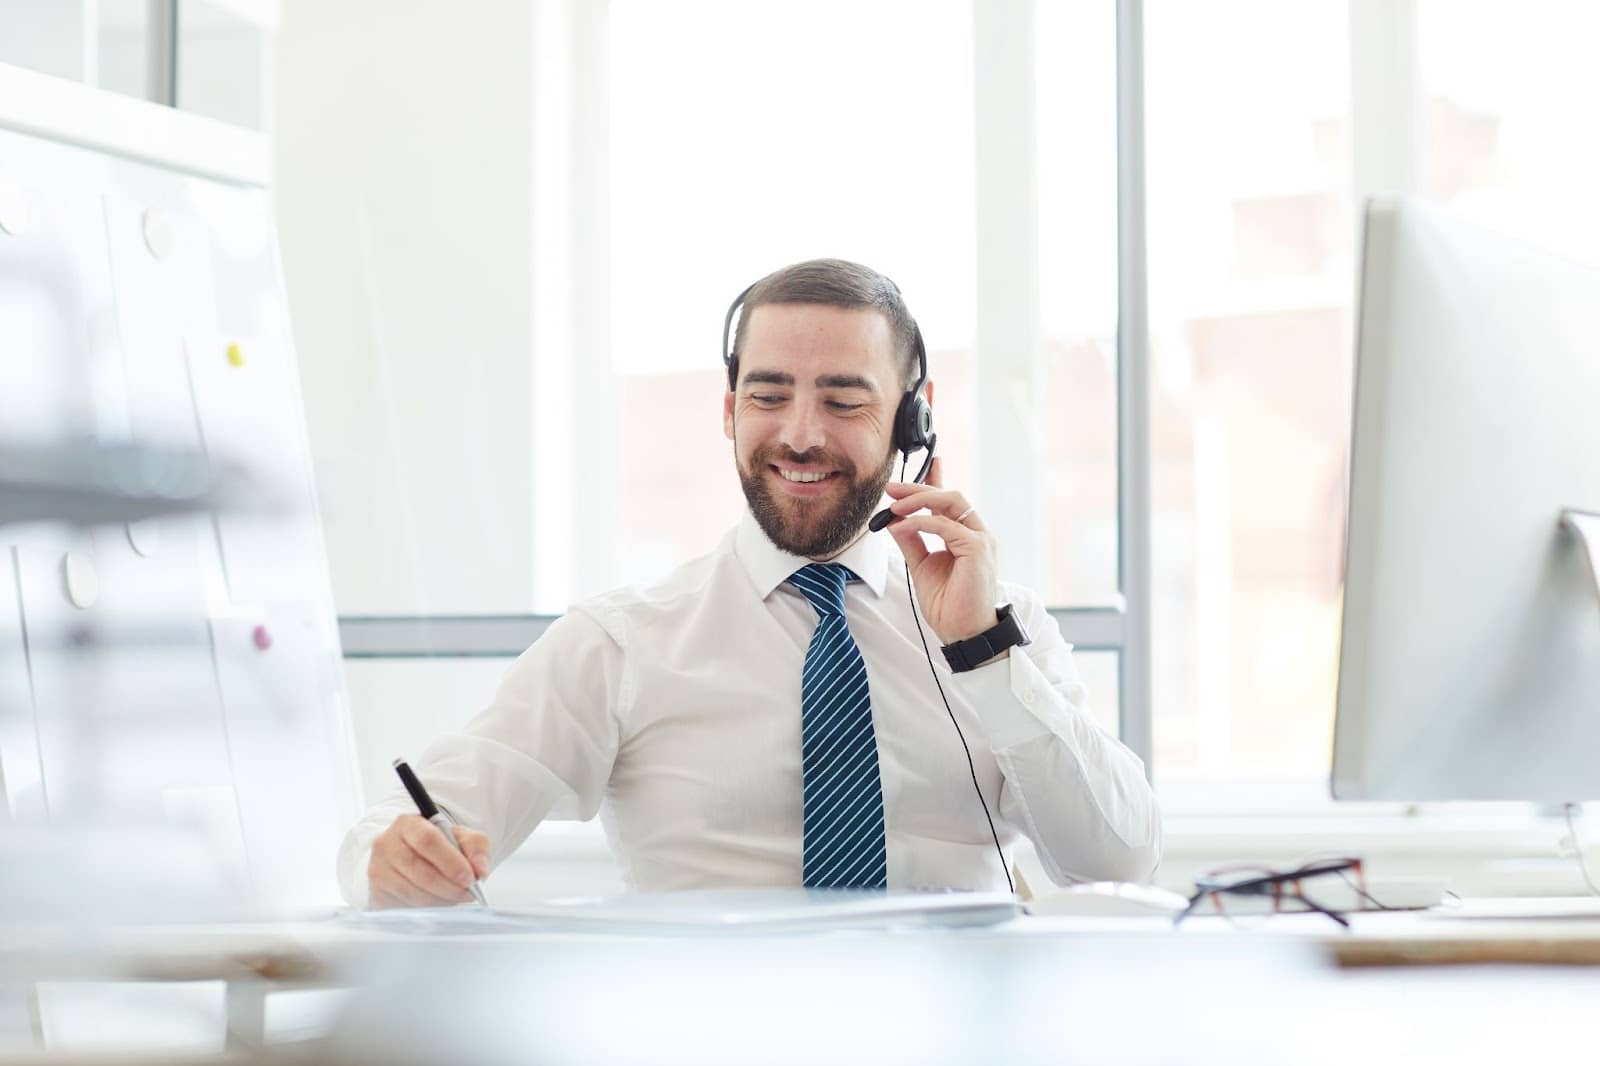 Advantages and disadvantages of telemarketing